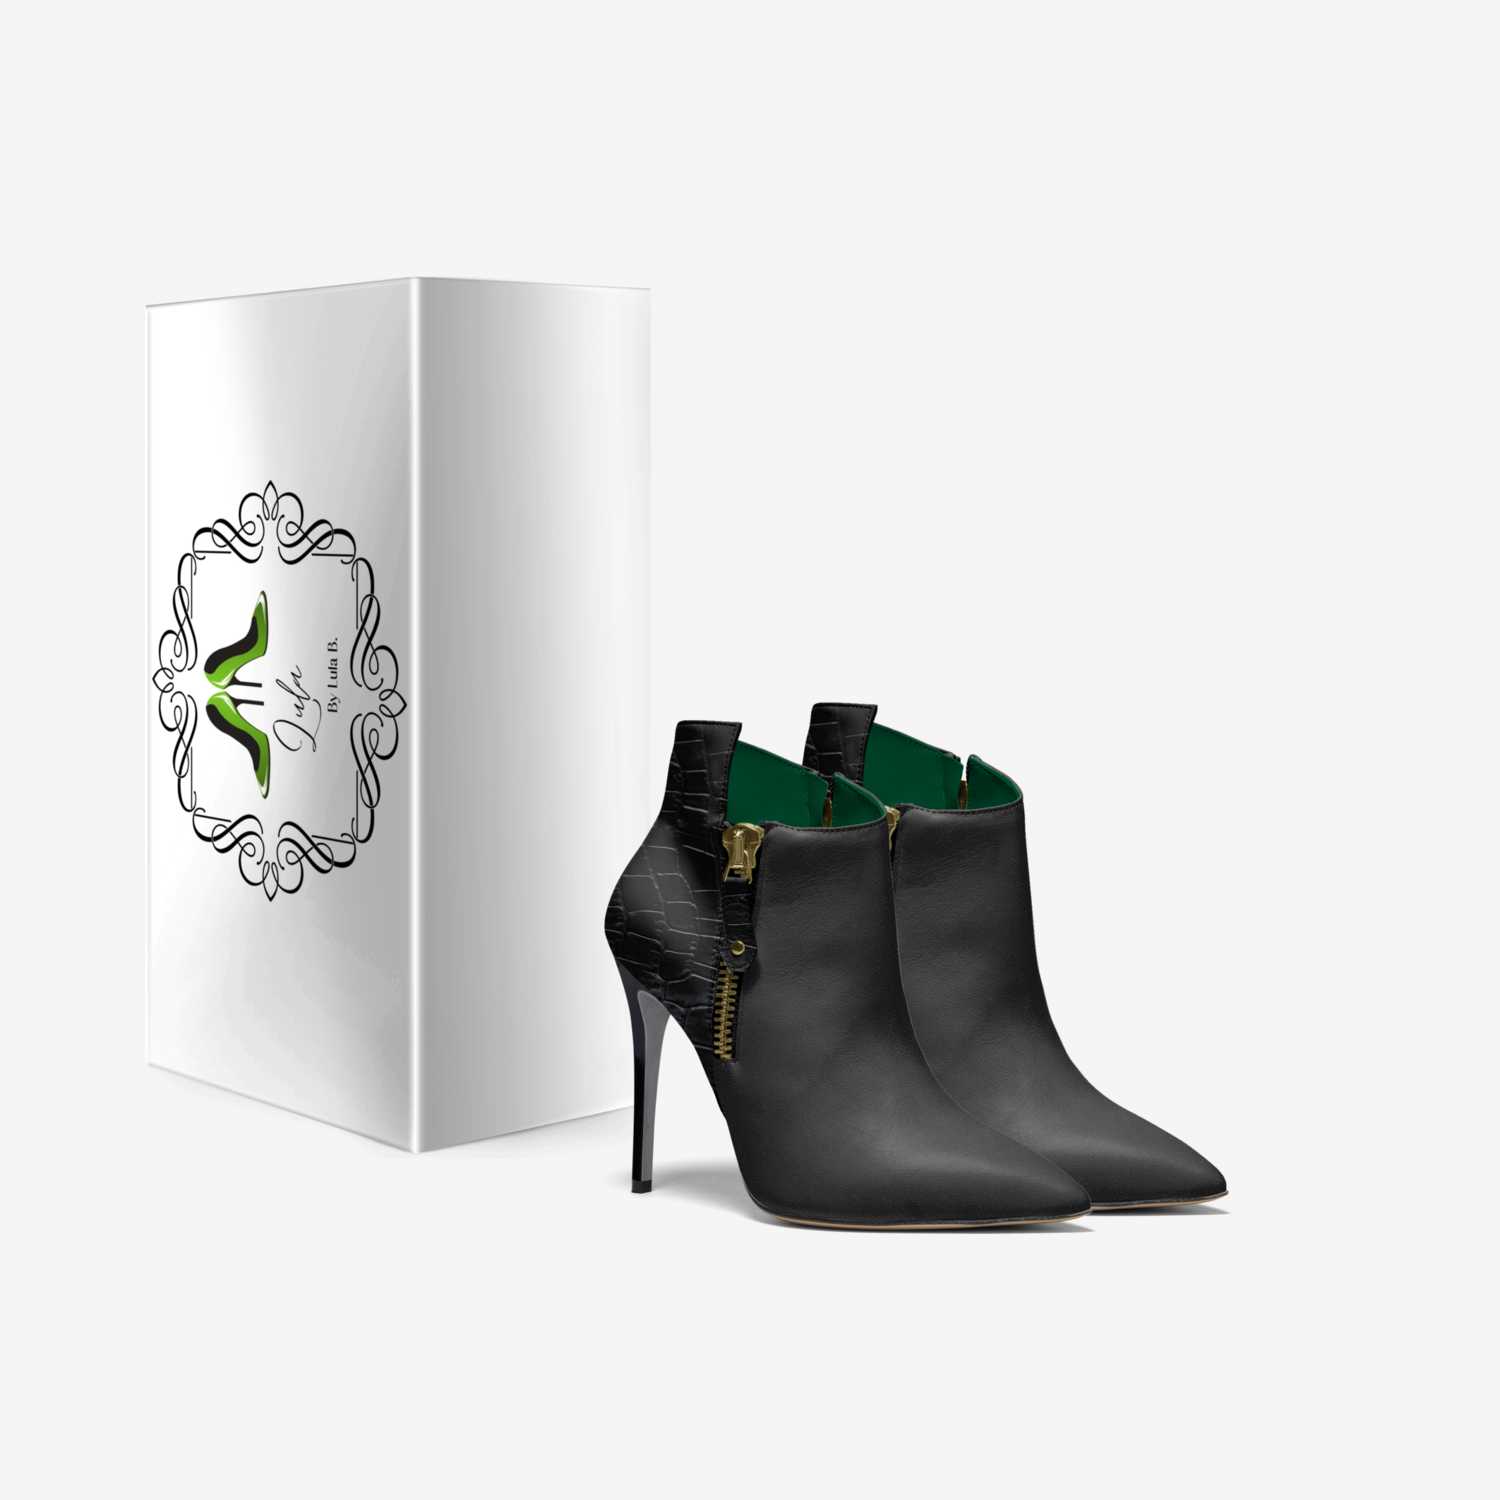 Queen V custom made in Italy shoes by Lula B | Box view